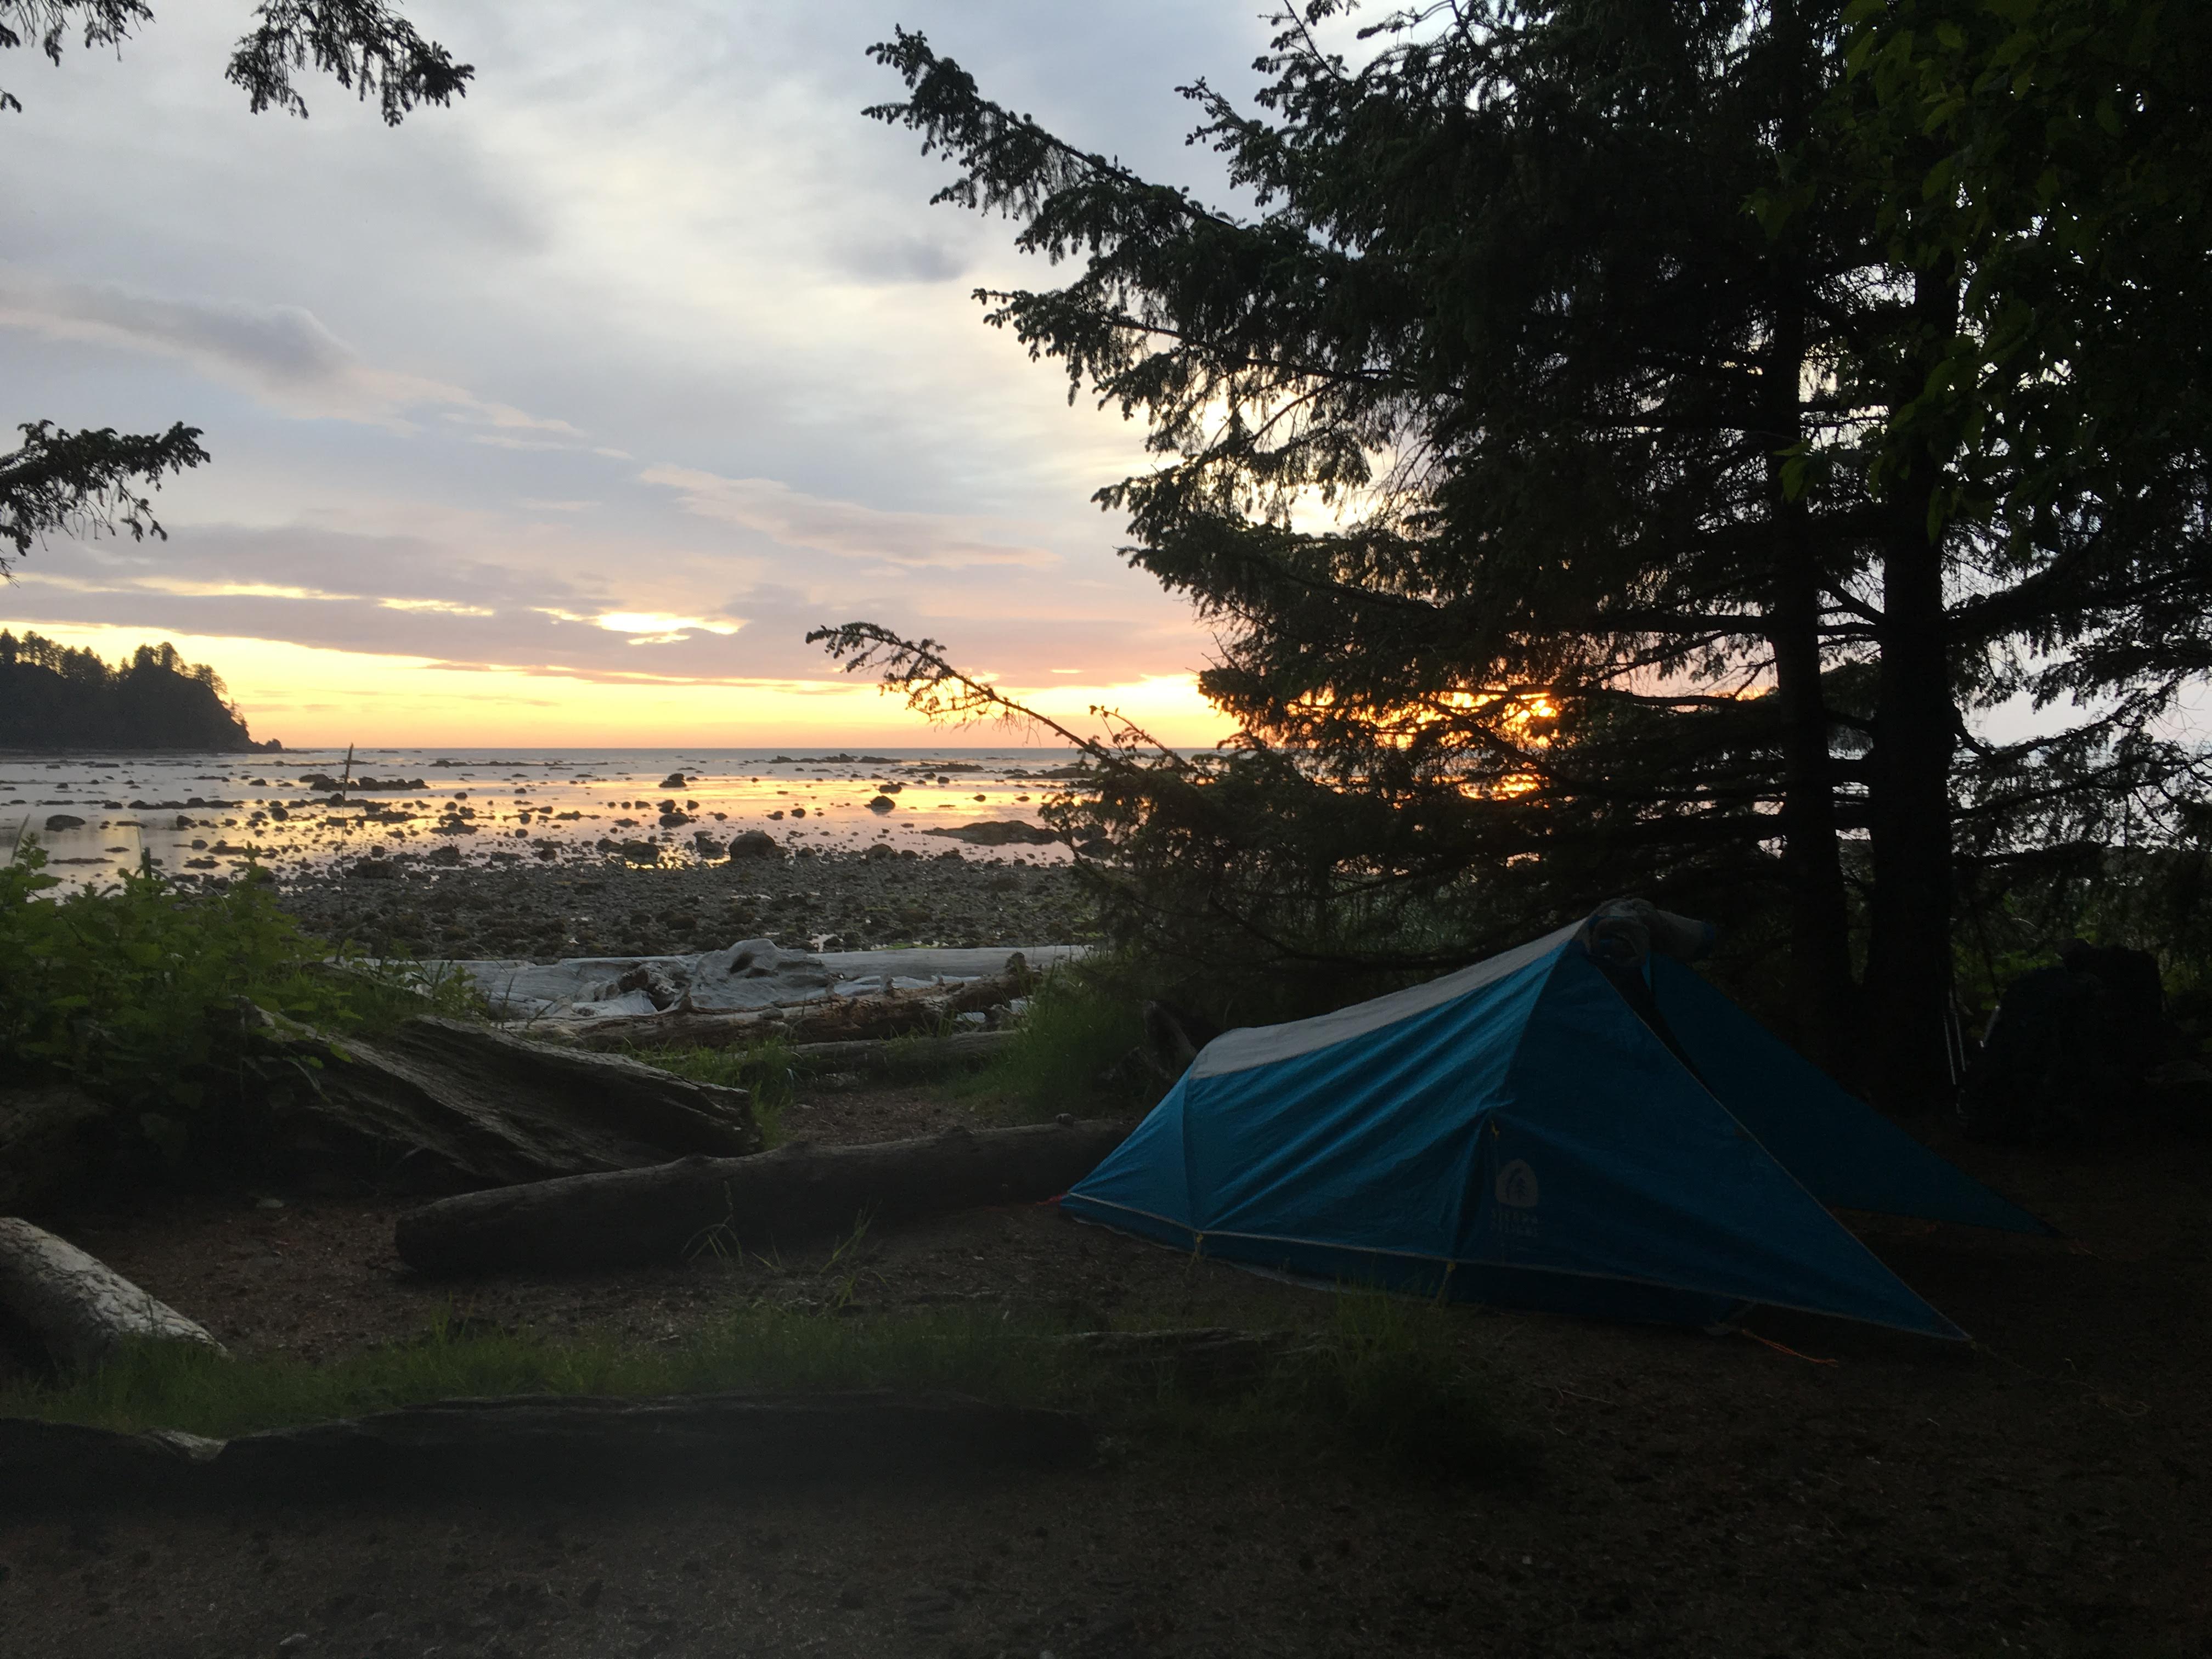 Our first campsite at Cape Alava!